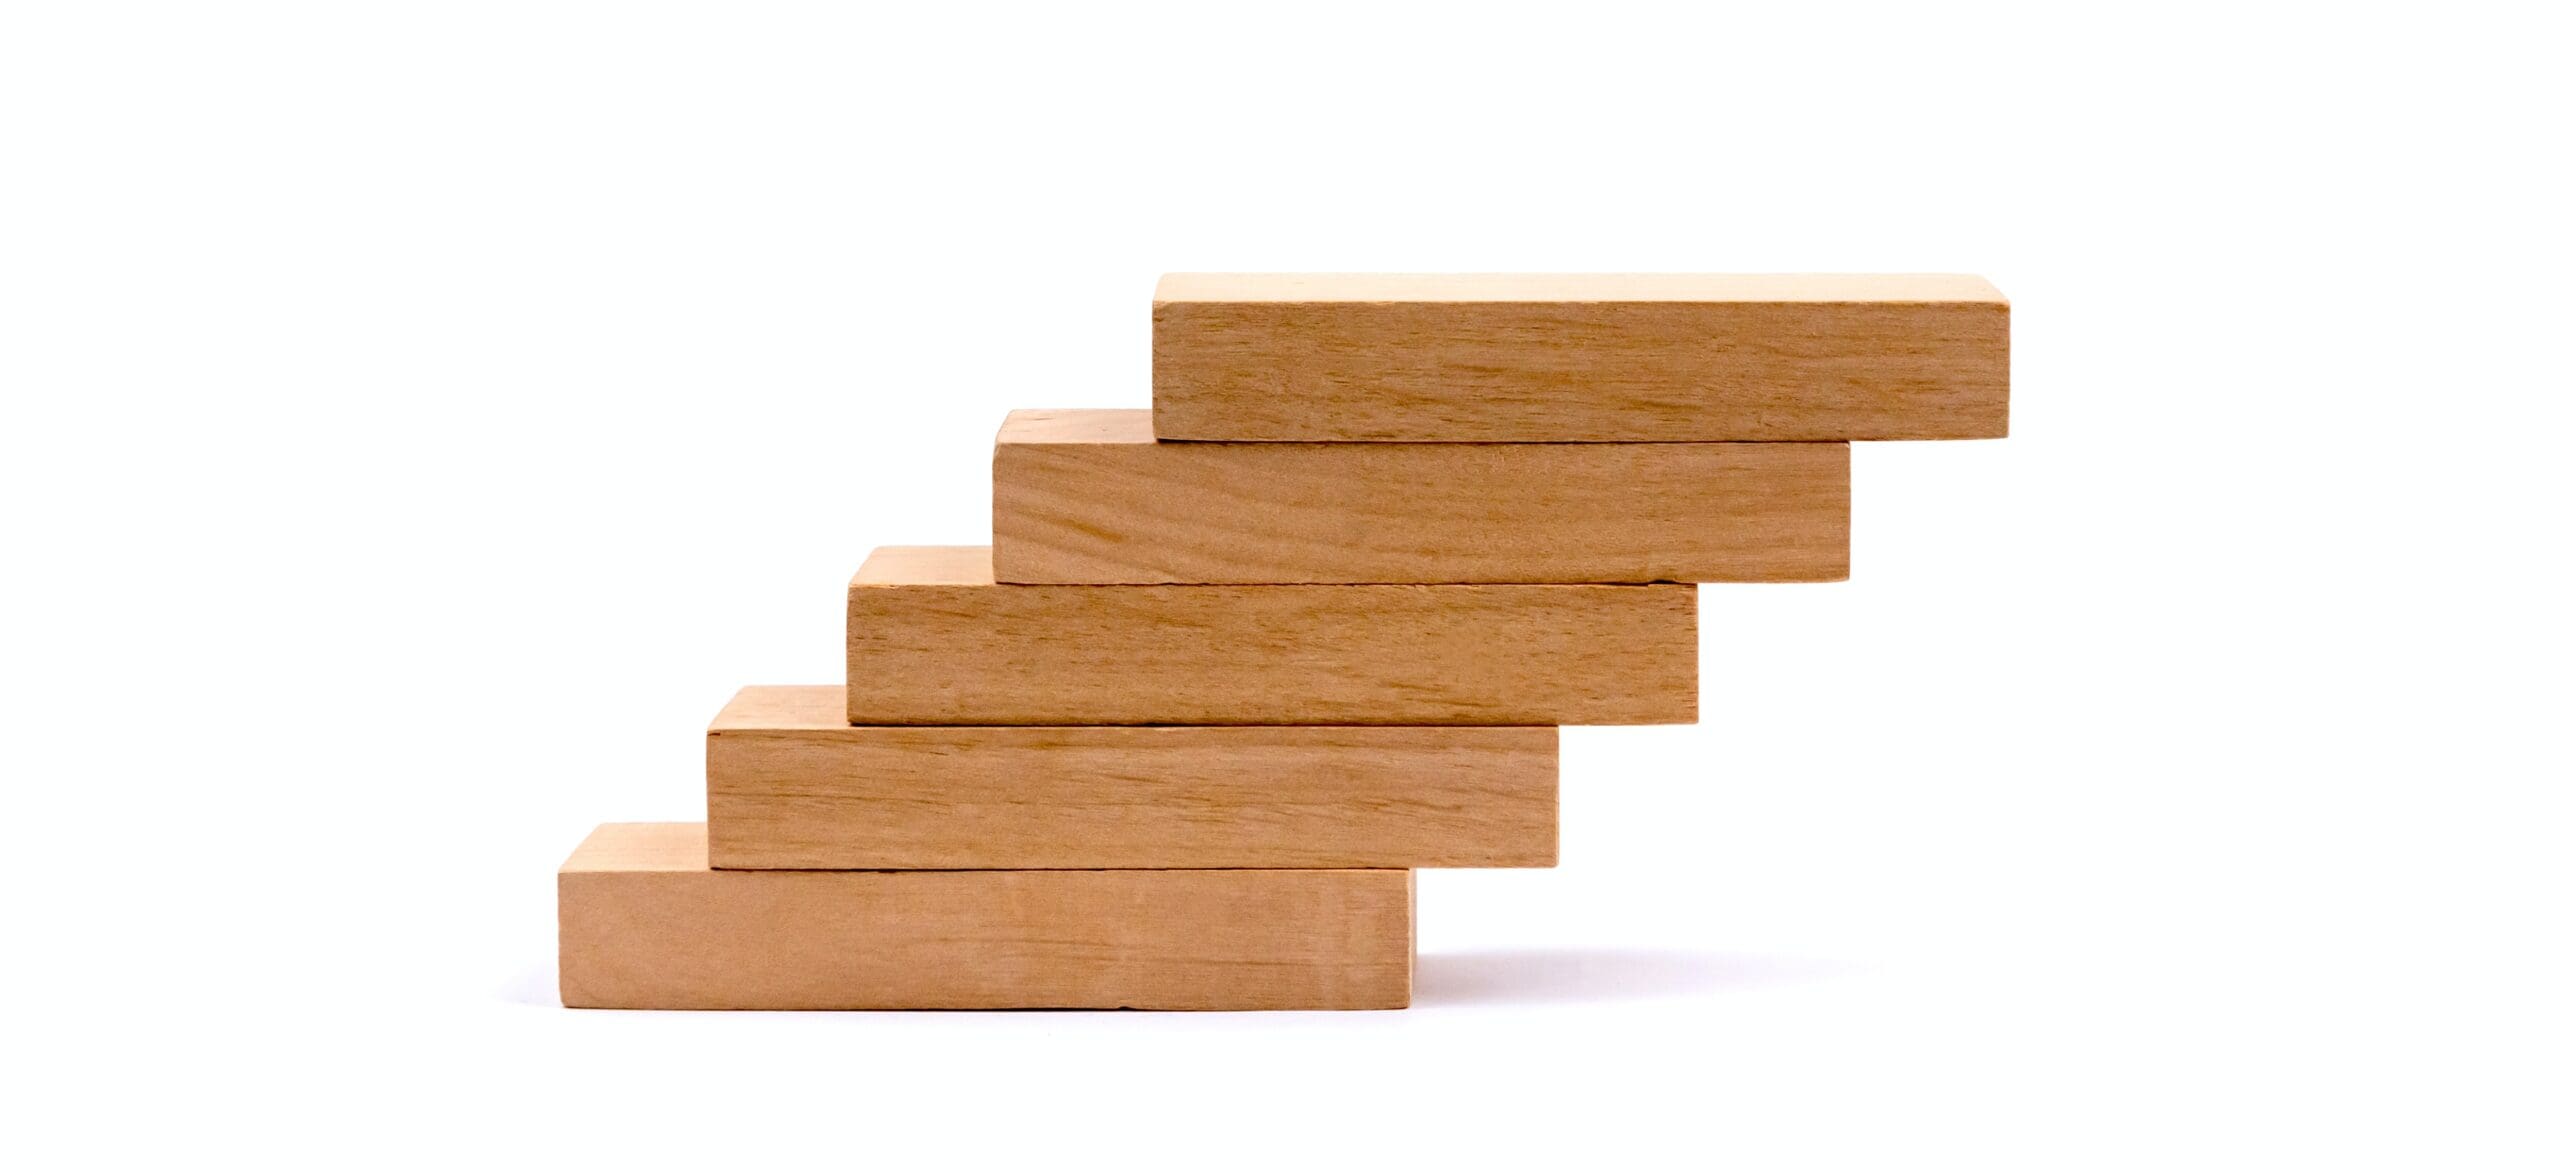 Wooden Blocks in a staircase pattern